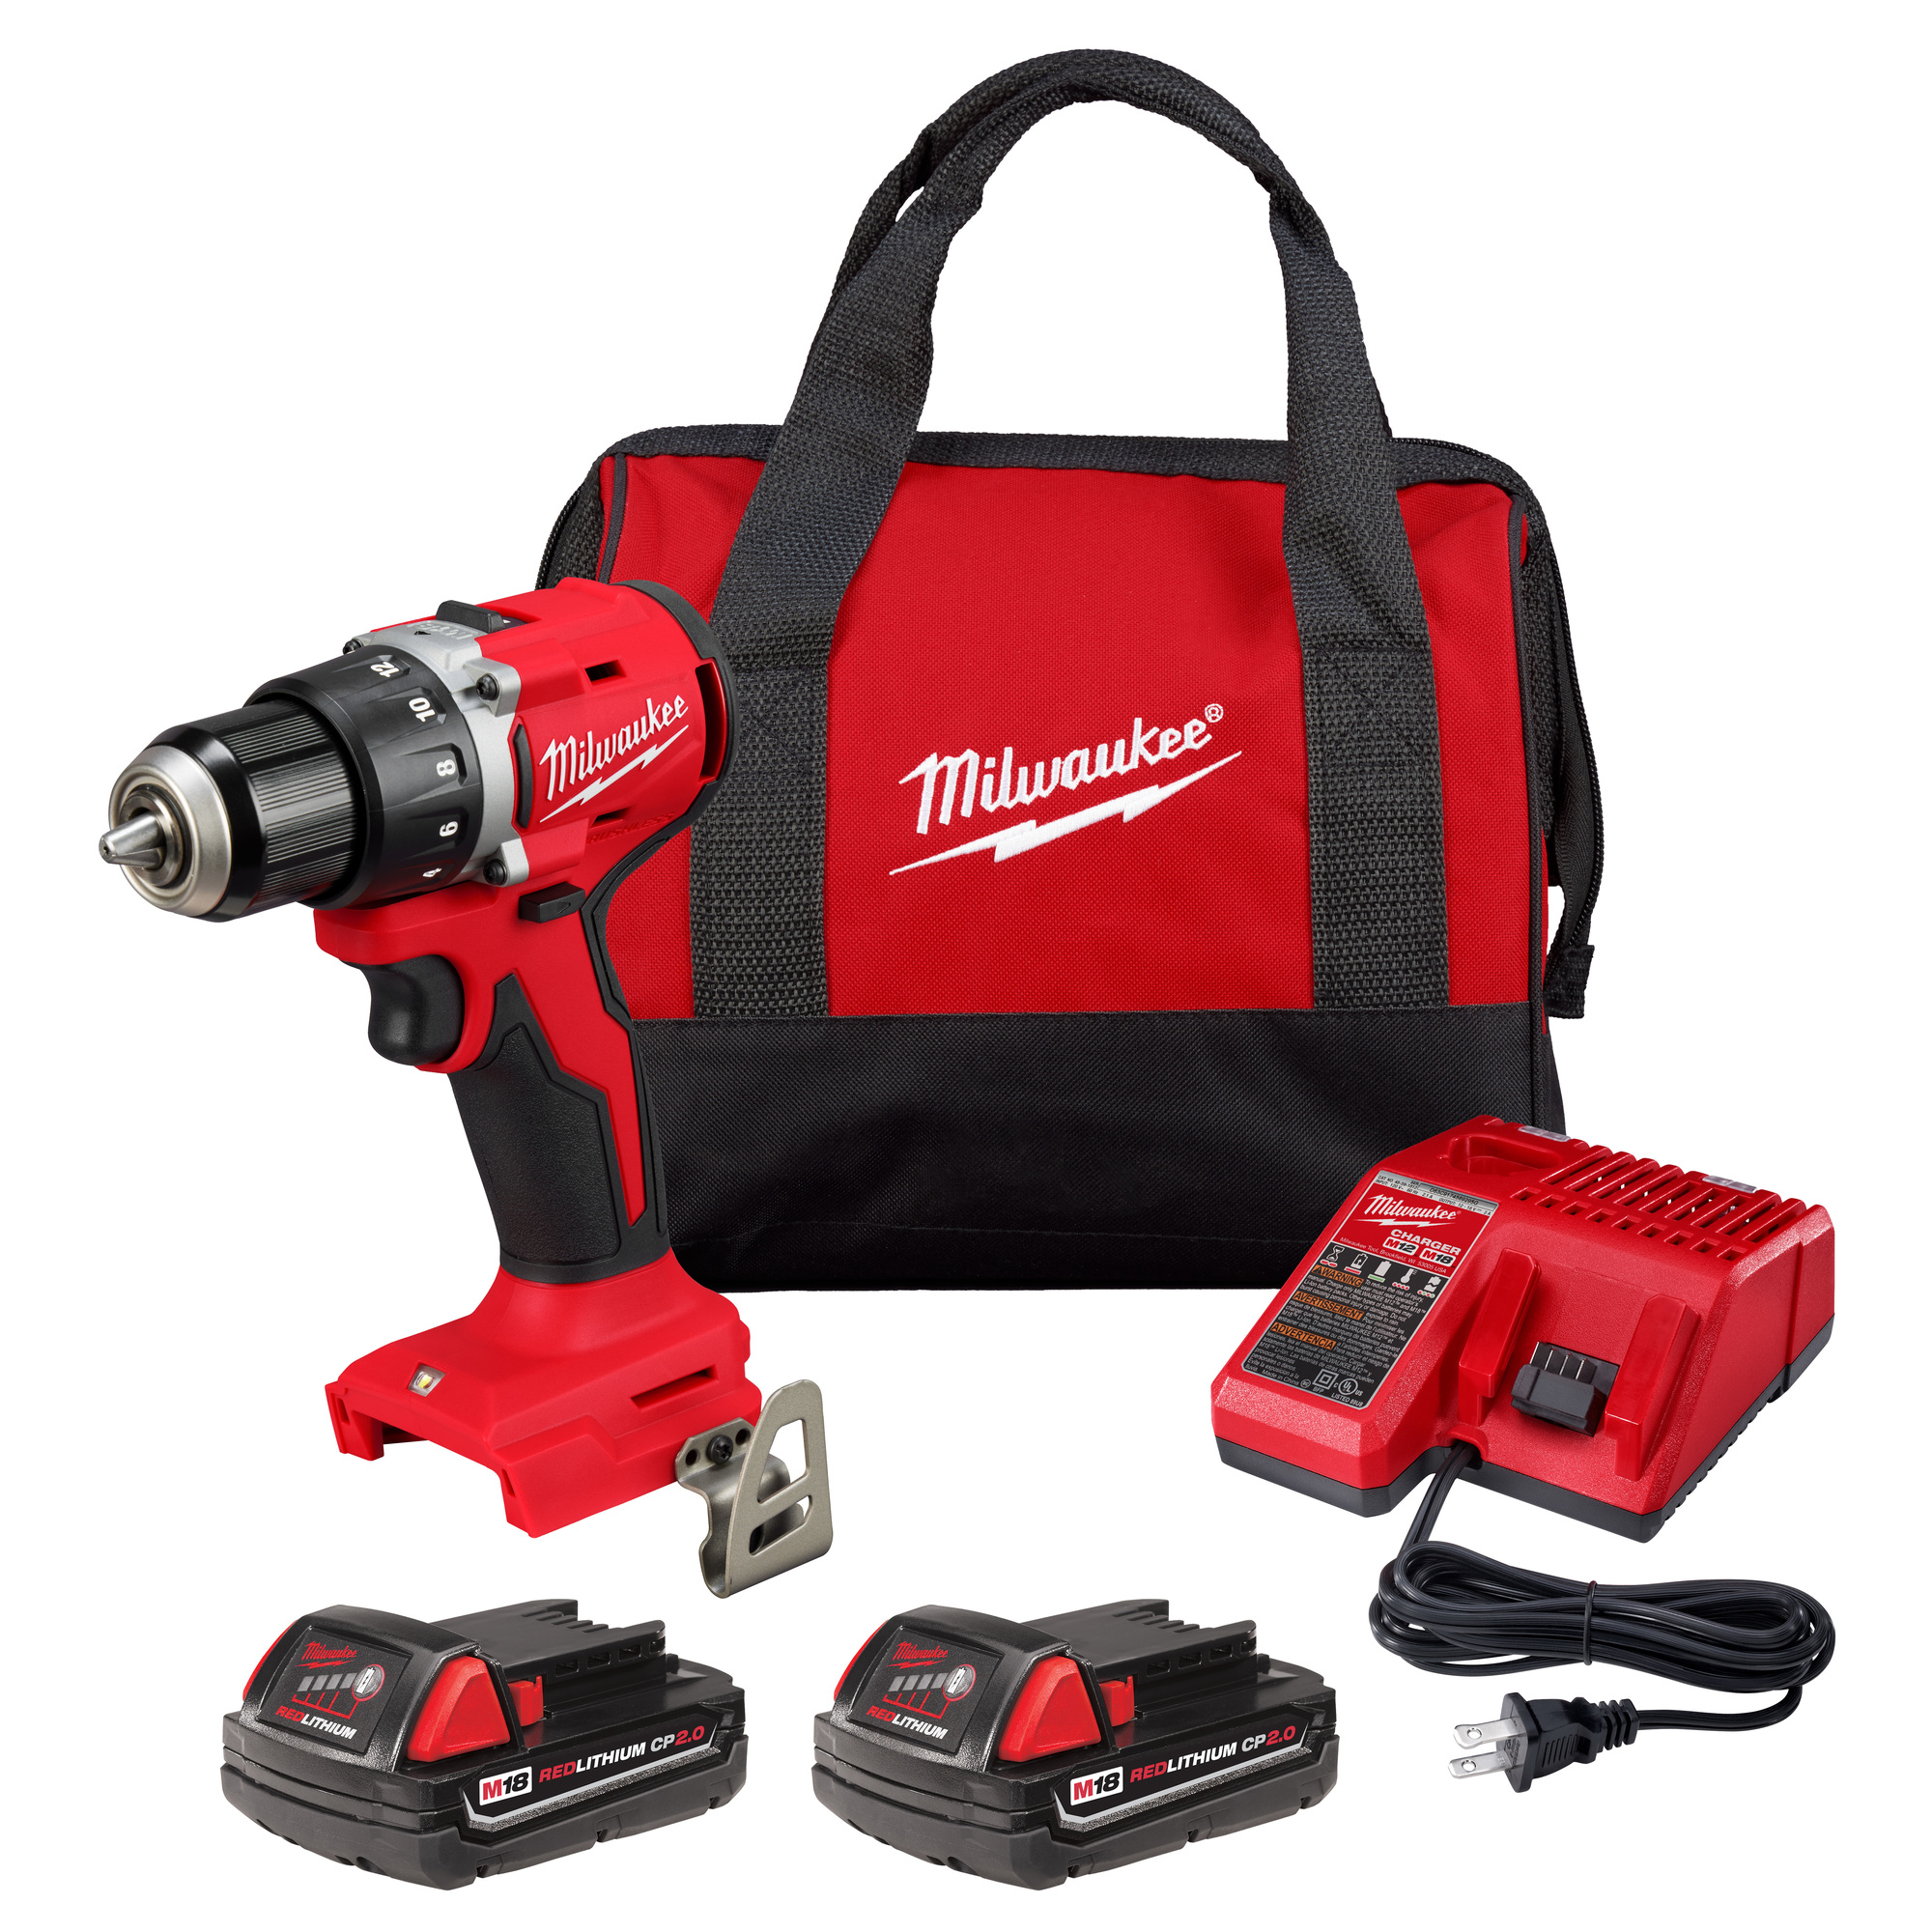 M18 Compact Brushless 1/2Inch Drill/Driver Kit, Chuck Size 1/2 in, Max. Torque 500 ft-lbs., Max. Speed 1700 rpm, Model - Milwaukee 3601-22CT